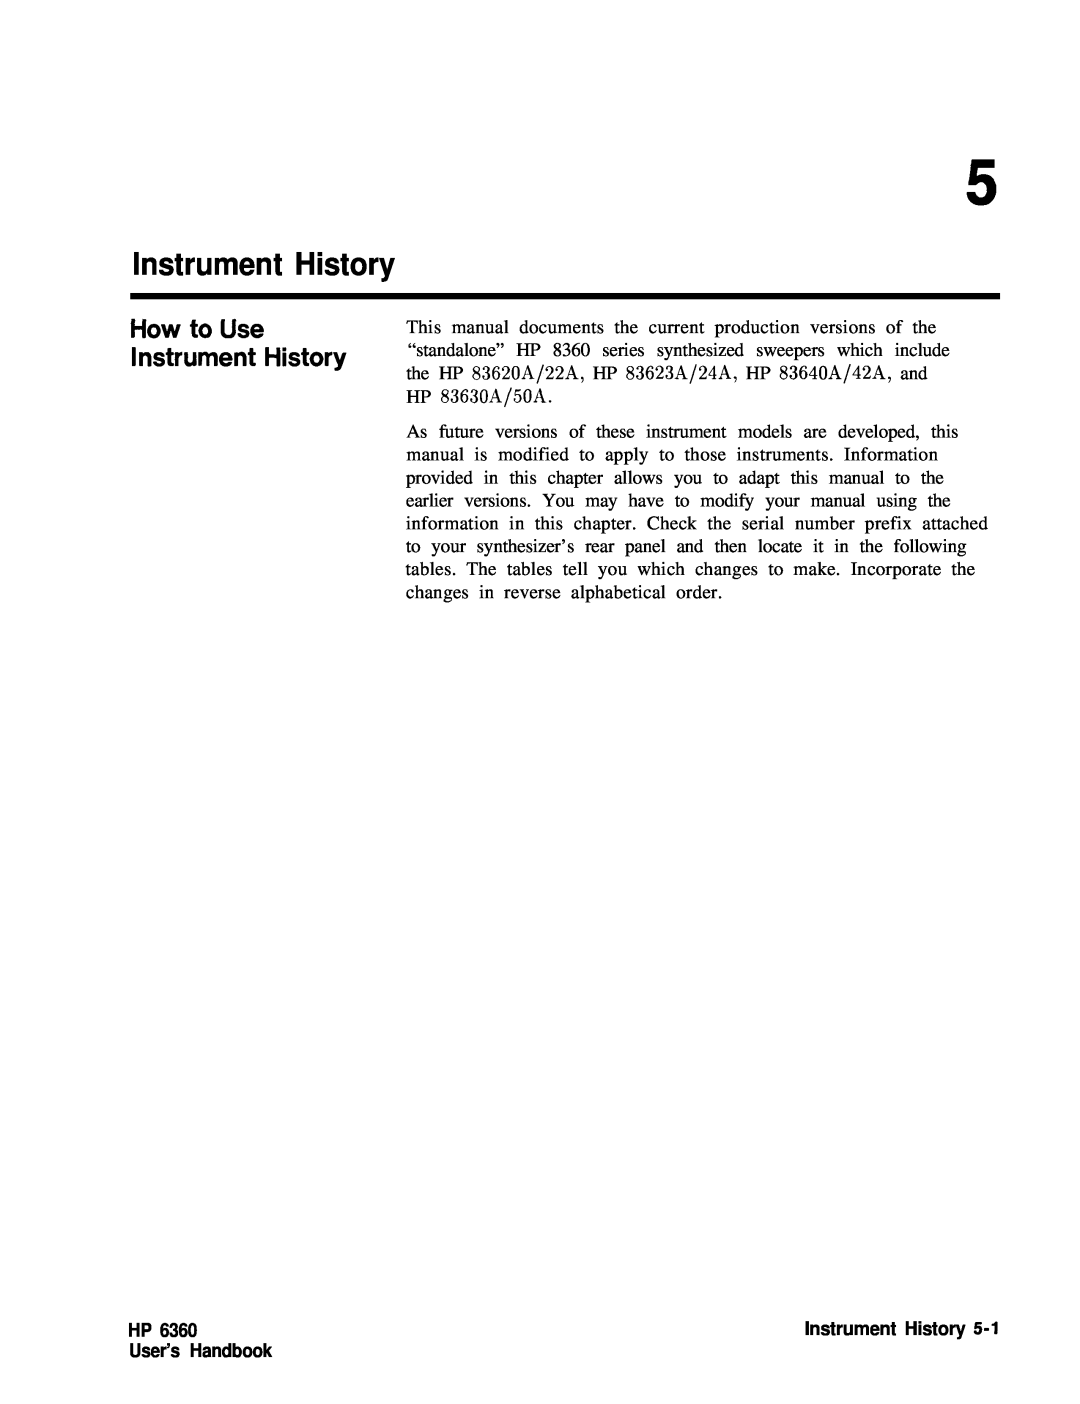 HP 24A, 83620A, 22A manual How to Use Instrument History, User’s Handbook 